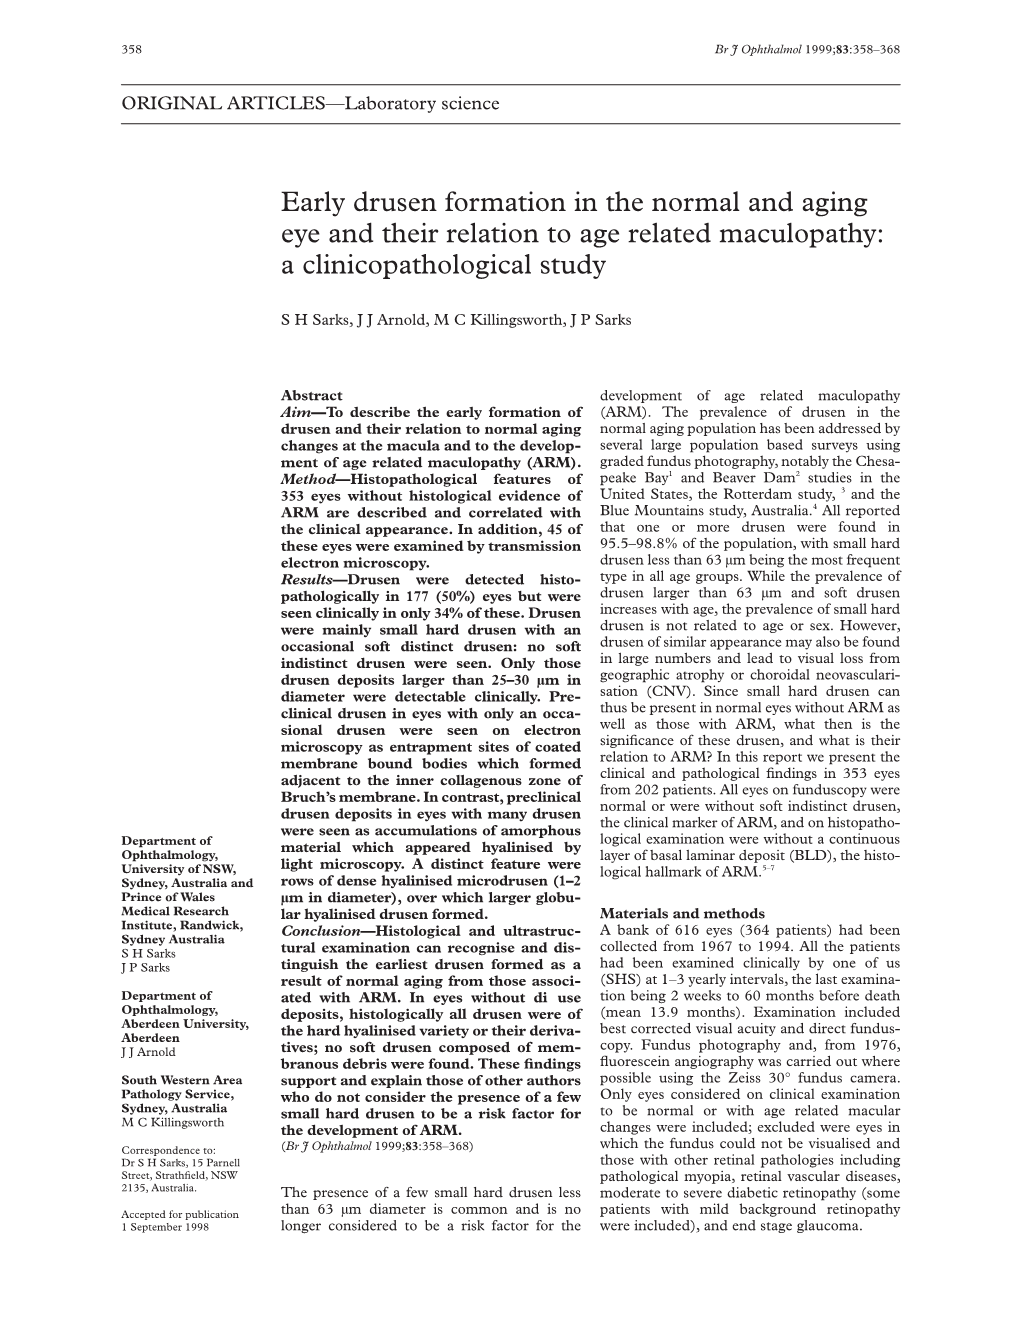 Early Drusen Formation in the Normal and Aging Eye and Their Relation to Age Related Maculopathy: a Clinicopathological Study